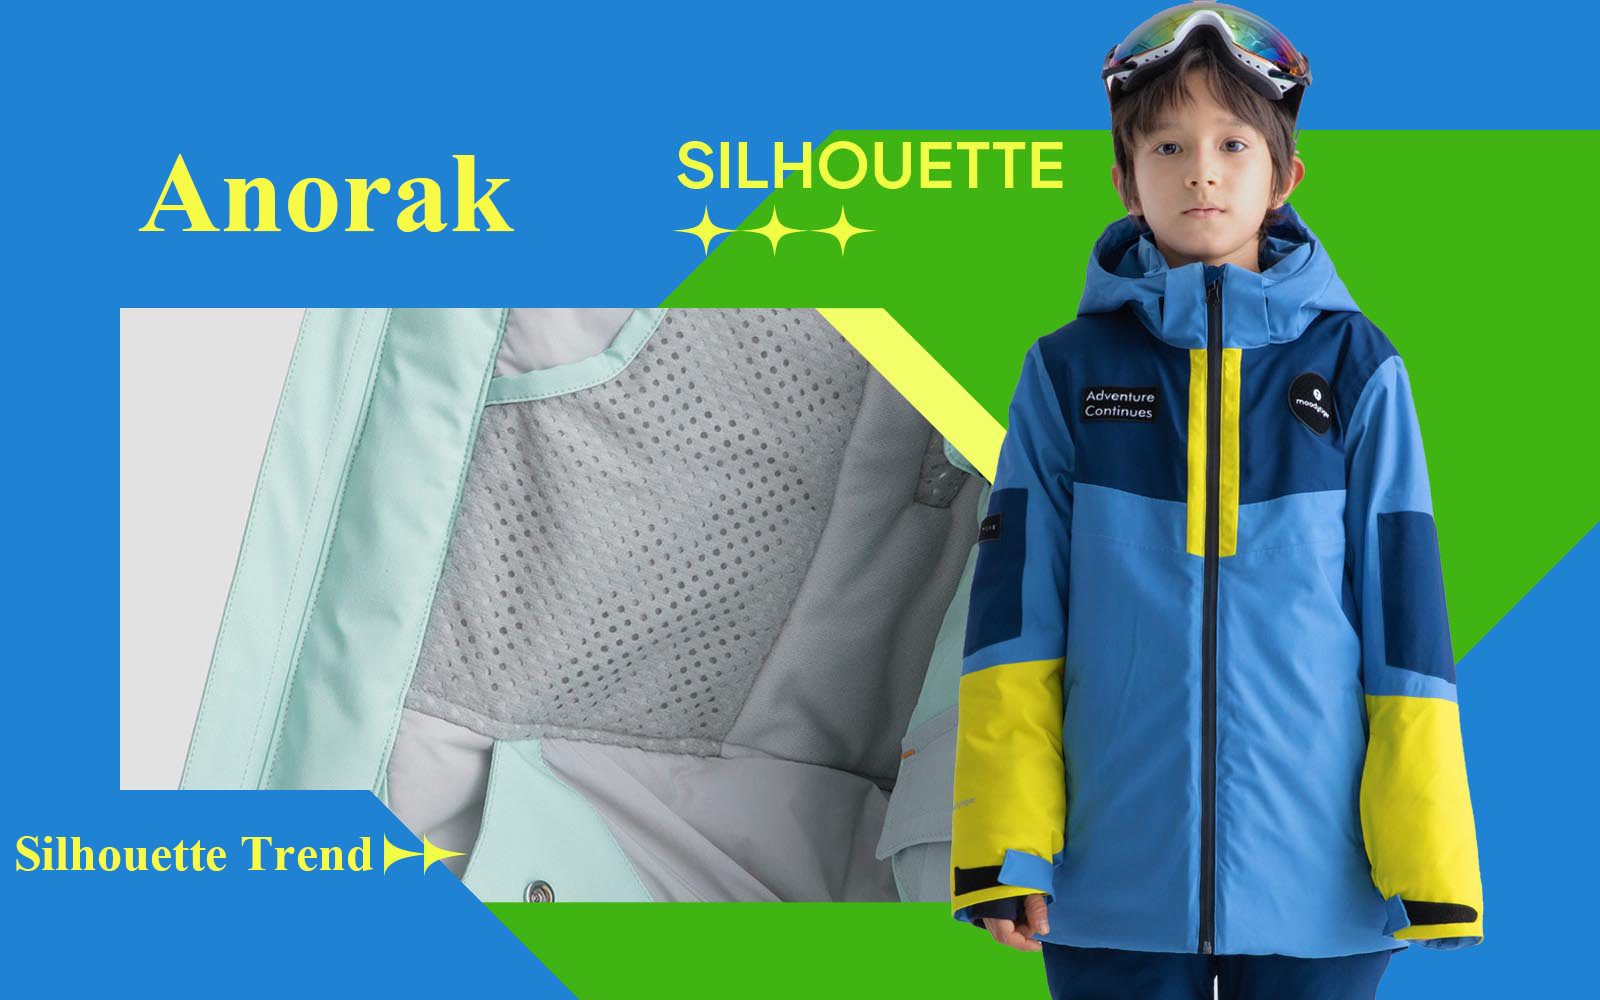 The Silhouette Trend for Boys' Anorak